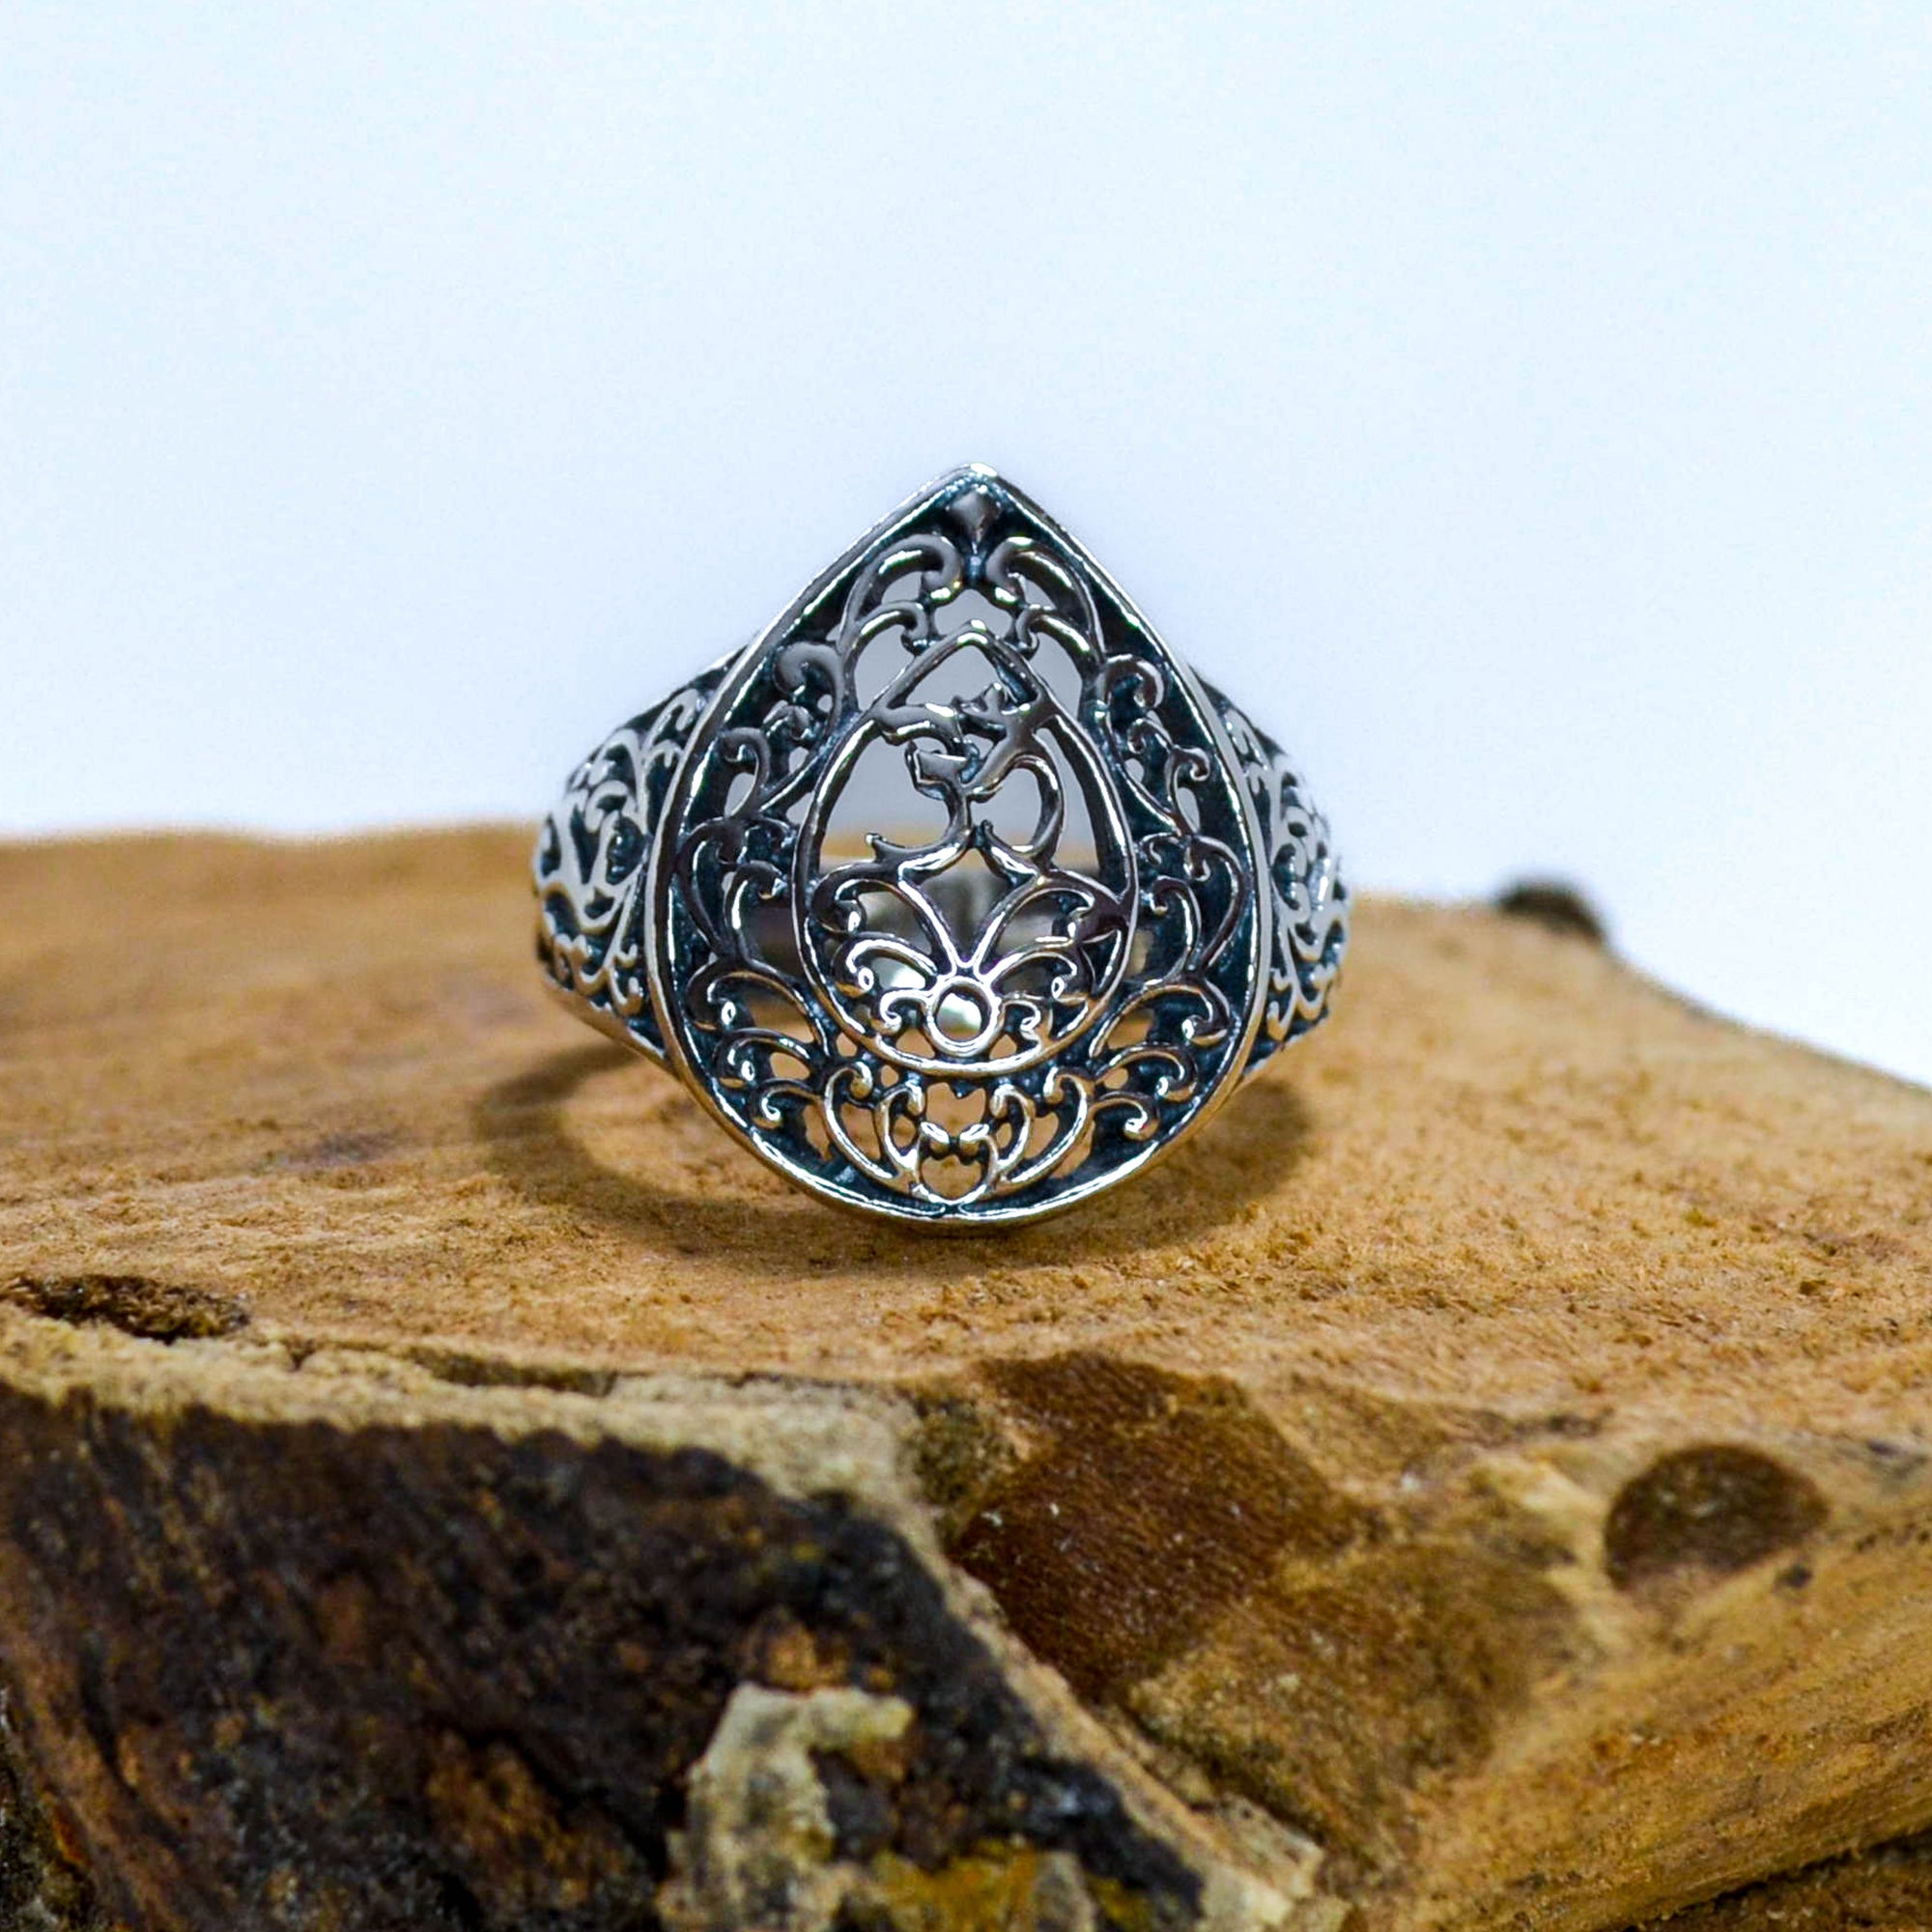 Ornate silver ring in a teardrop shape with small OM symbol sitting on wood